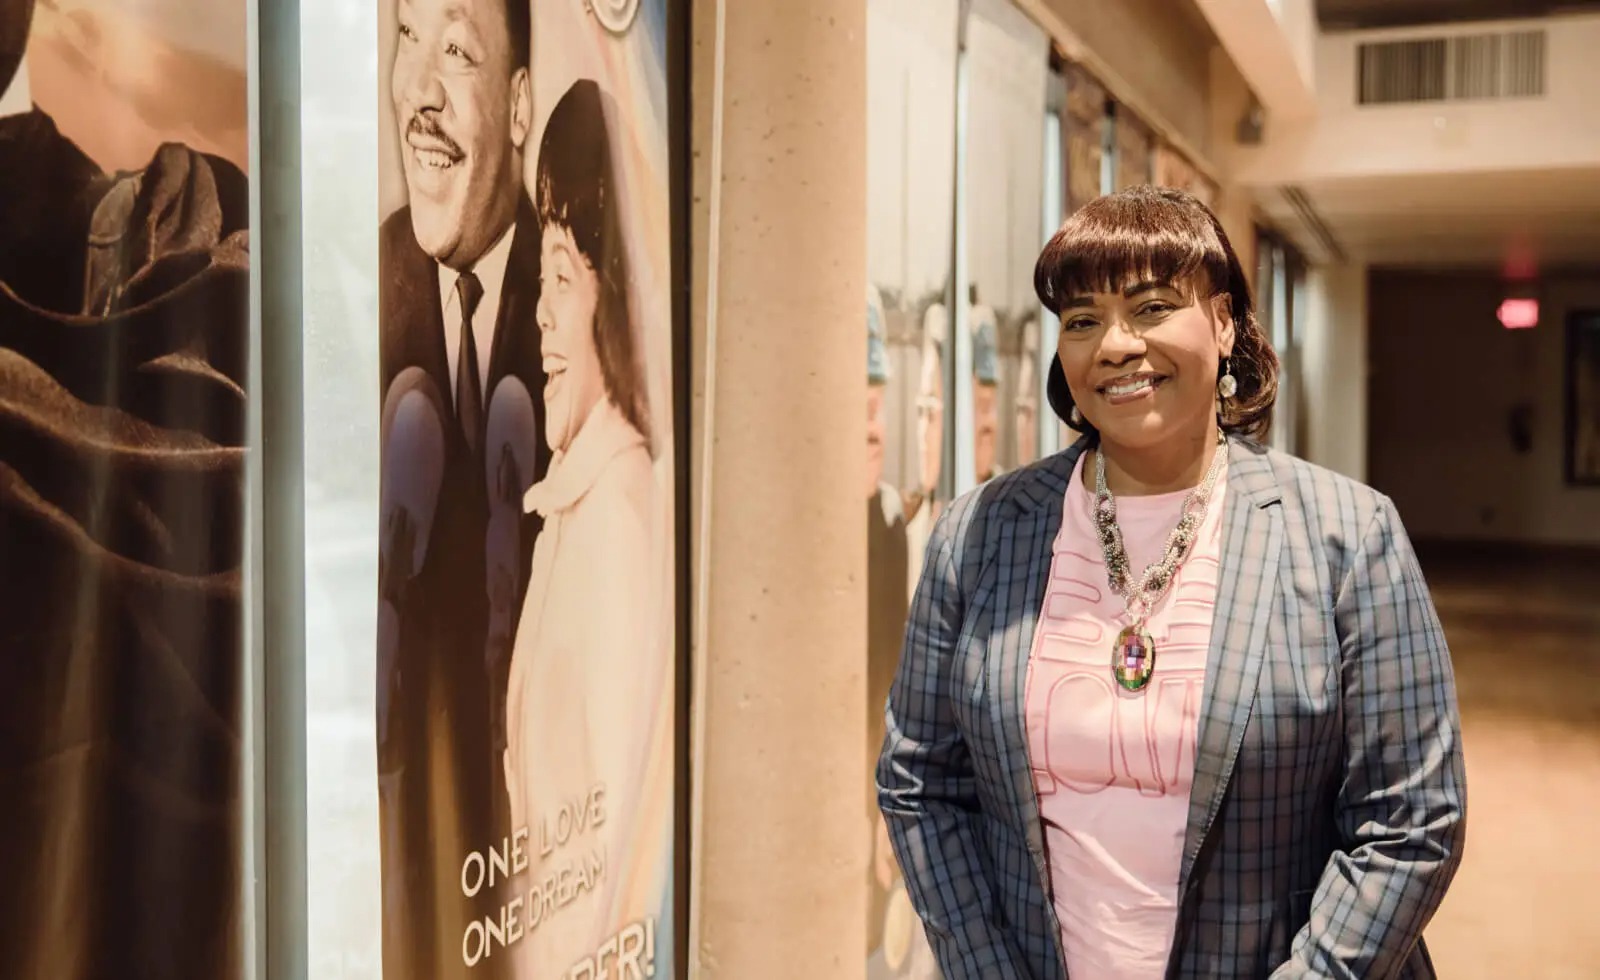 Dr. Bernice A. King smiles next to a poster of Dr. Martin Luther King, Jr. and Coretta Scott King.